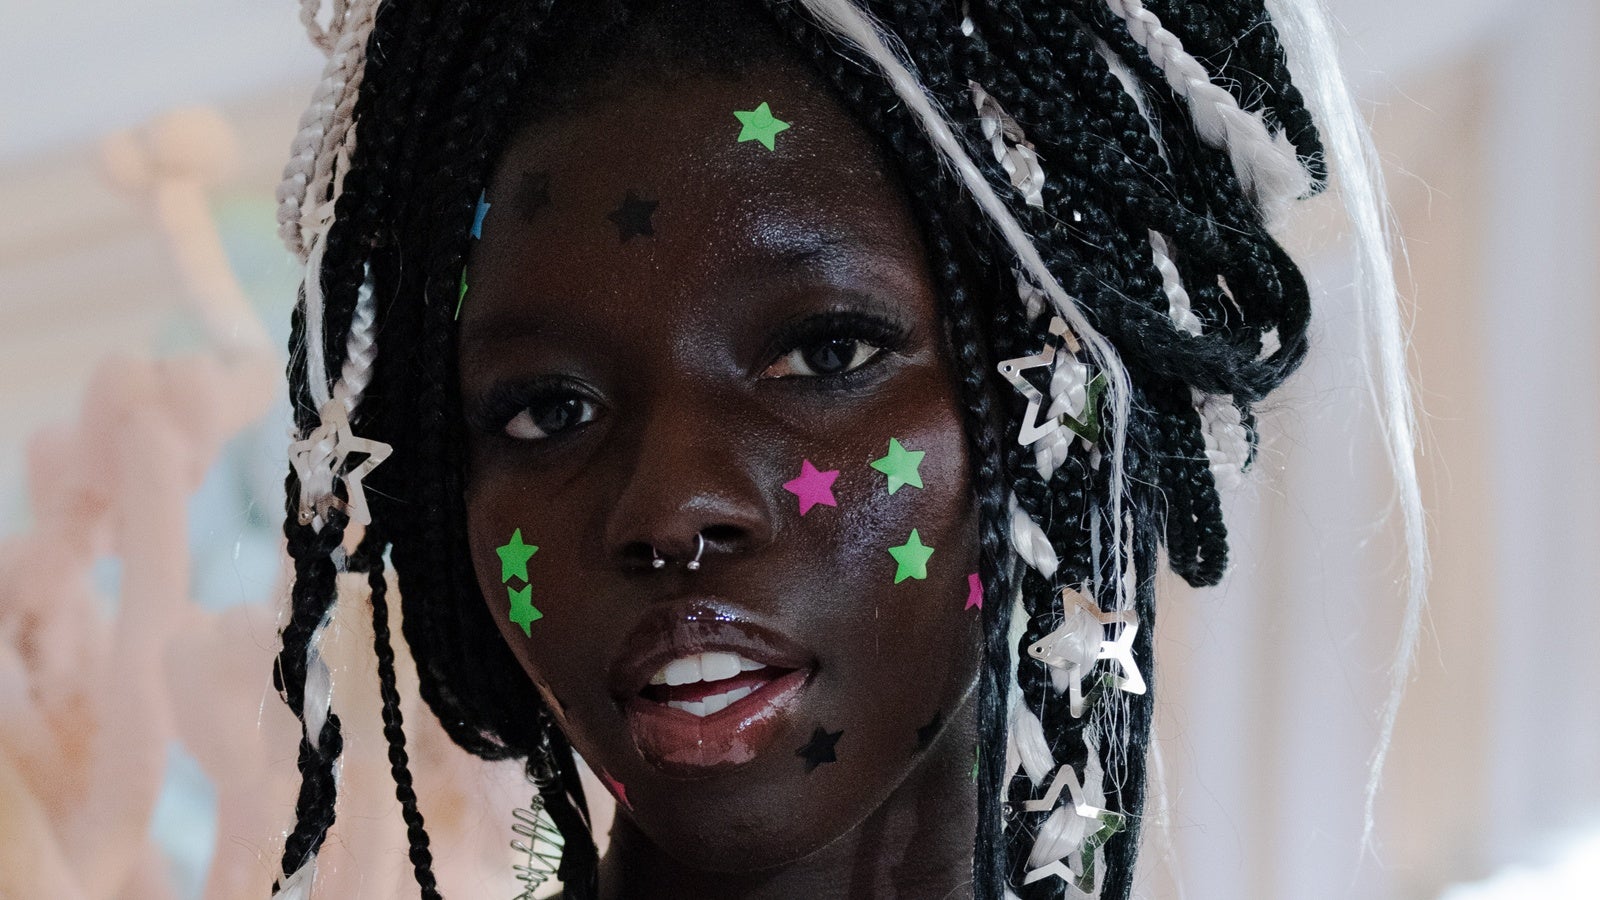 Starface, Glossier Collaborate On New Limited Edition Zit Stickers